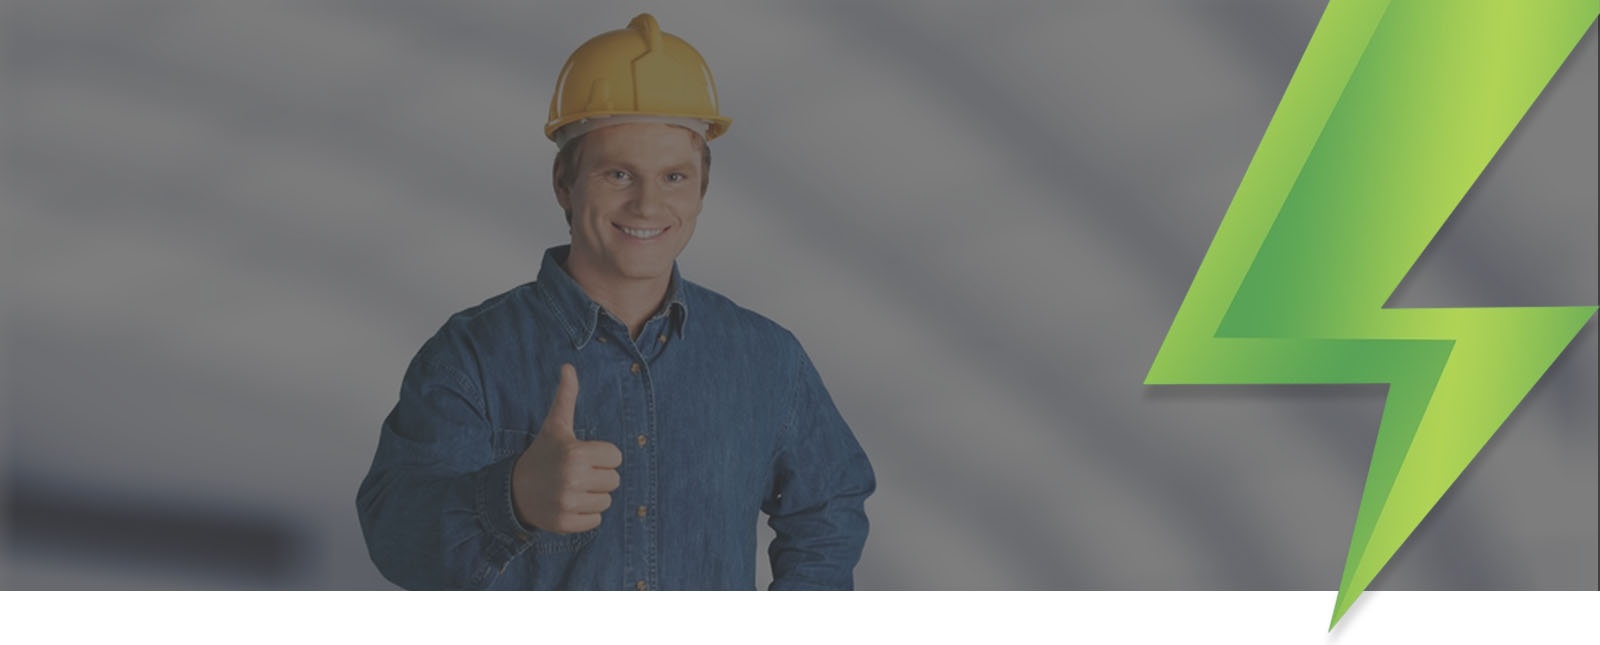 Our Residential, Commercial Electrician offers Electrical Services across Gibbons, Alberta